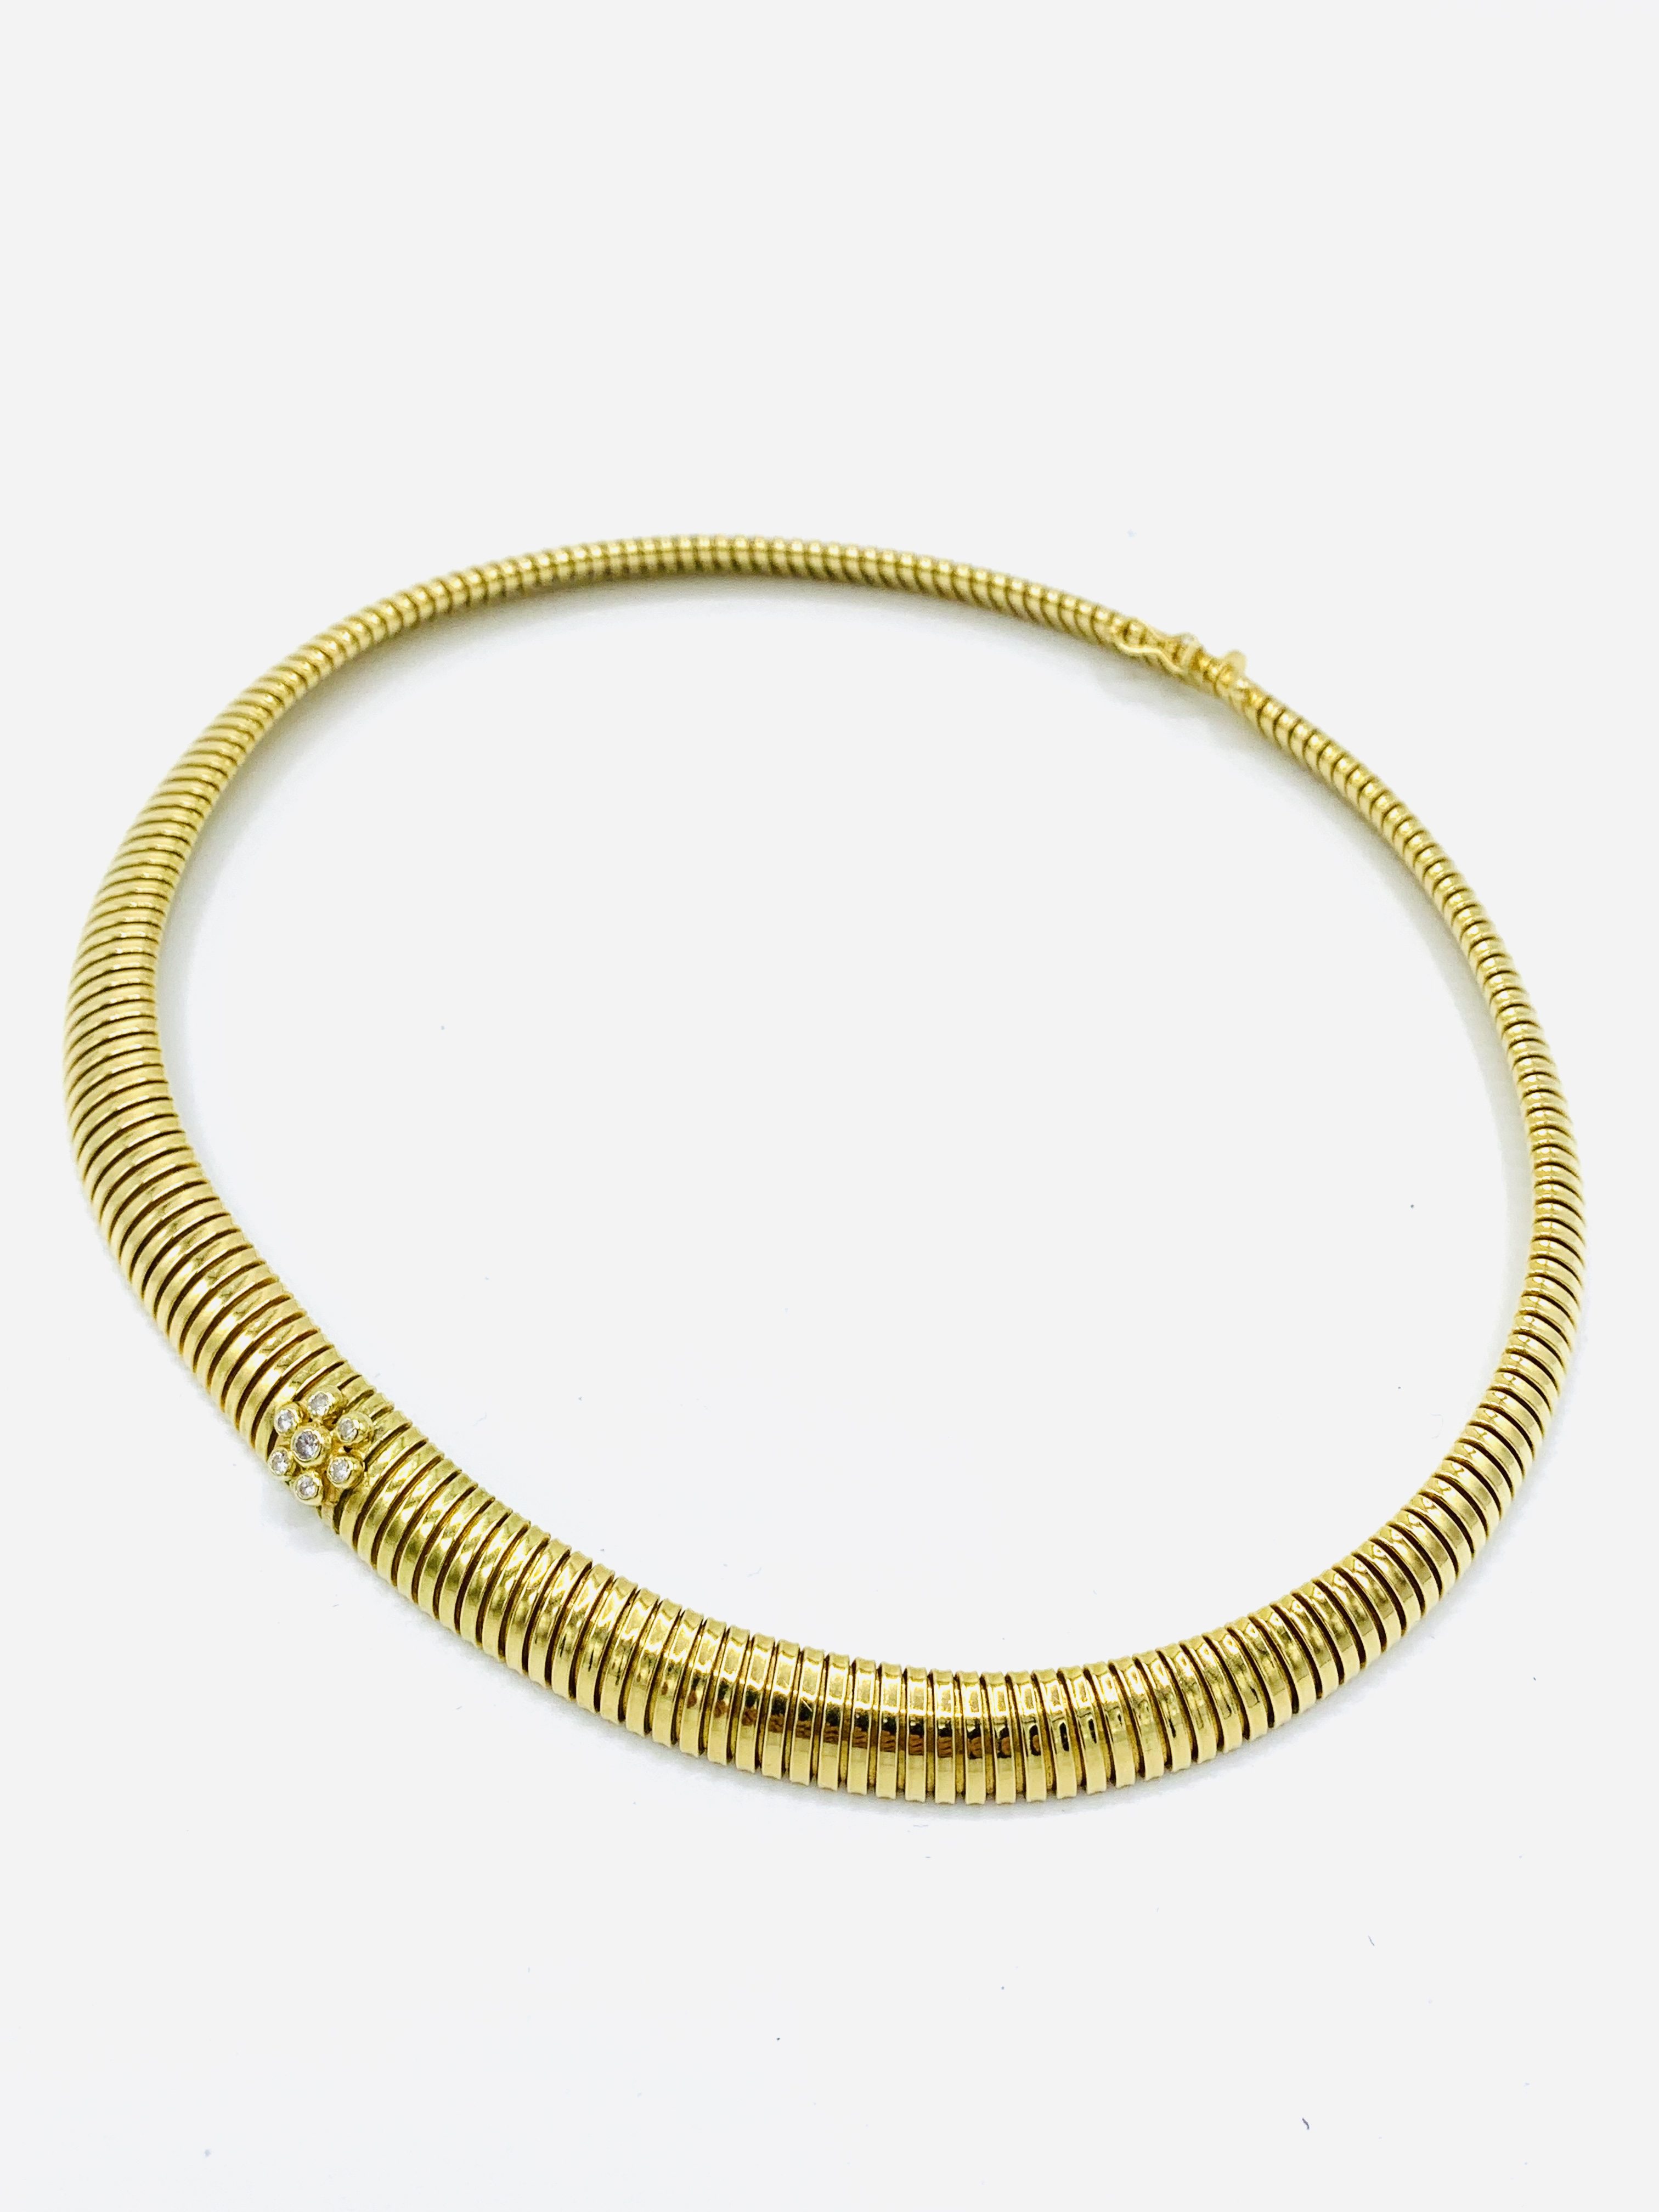 18ct gold turbogaz collar necklace. - Image 4 of 6